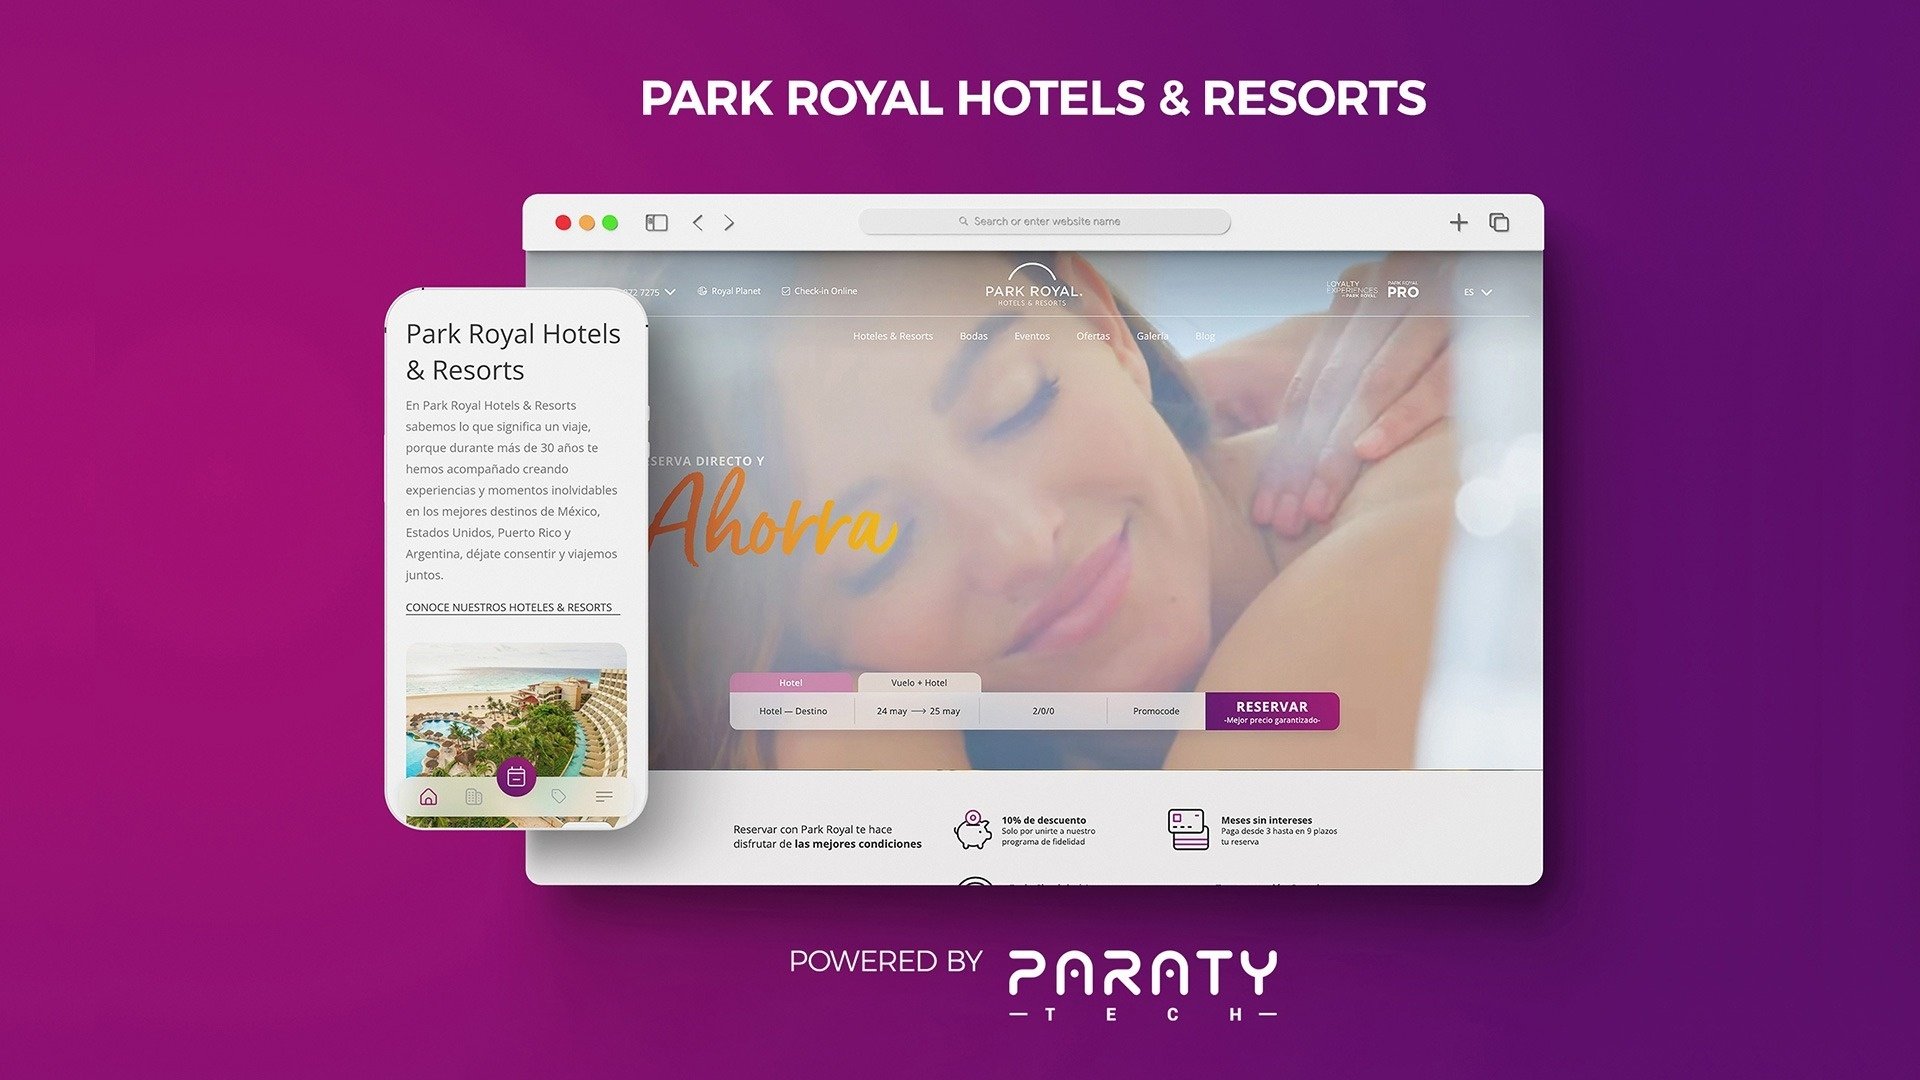 Park Royal Hotels & Resorts chooses Paraty Tech to boost its direct channel